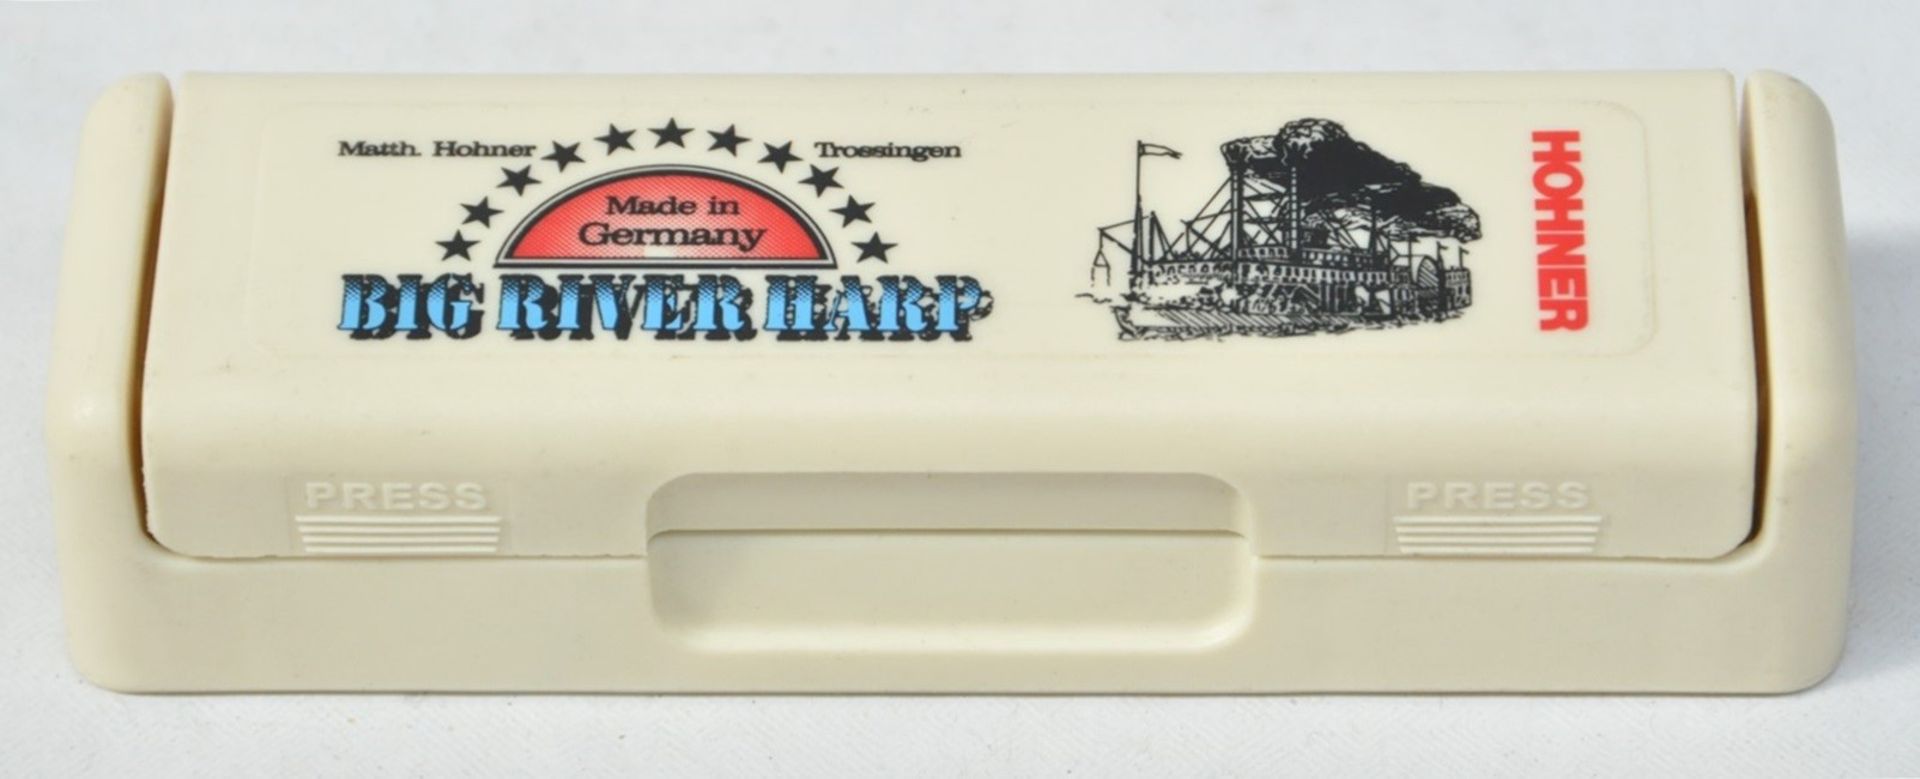 1 x Hohner Big River Harp Mouth Harmonica - Made in Germany - Key G - CL020 - Ref Pro89 - Unused - Image 3 of 5